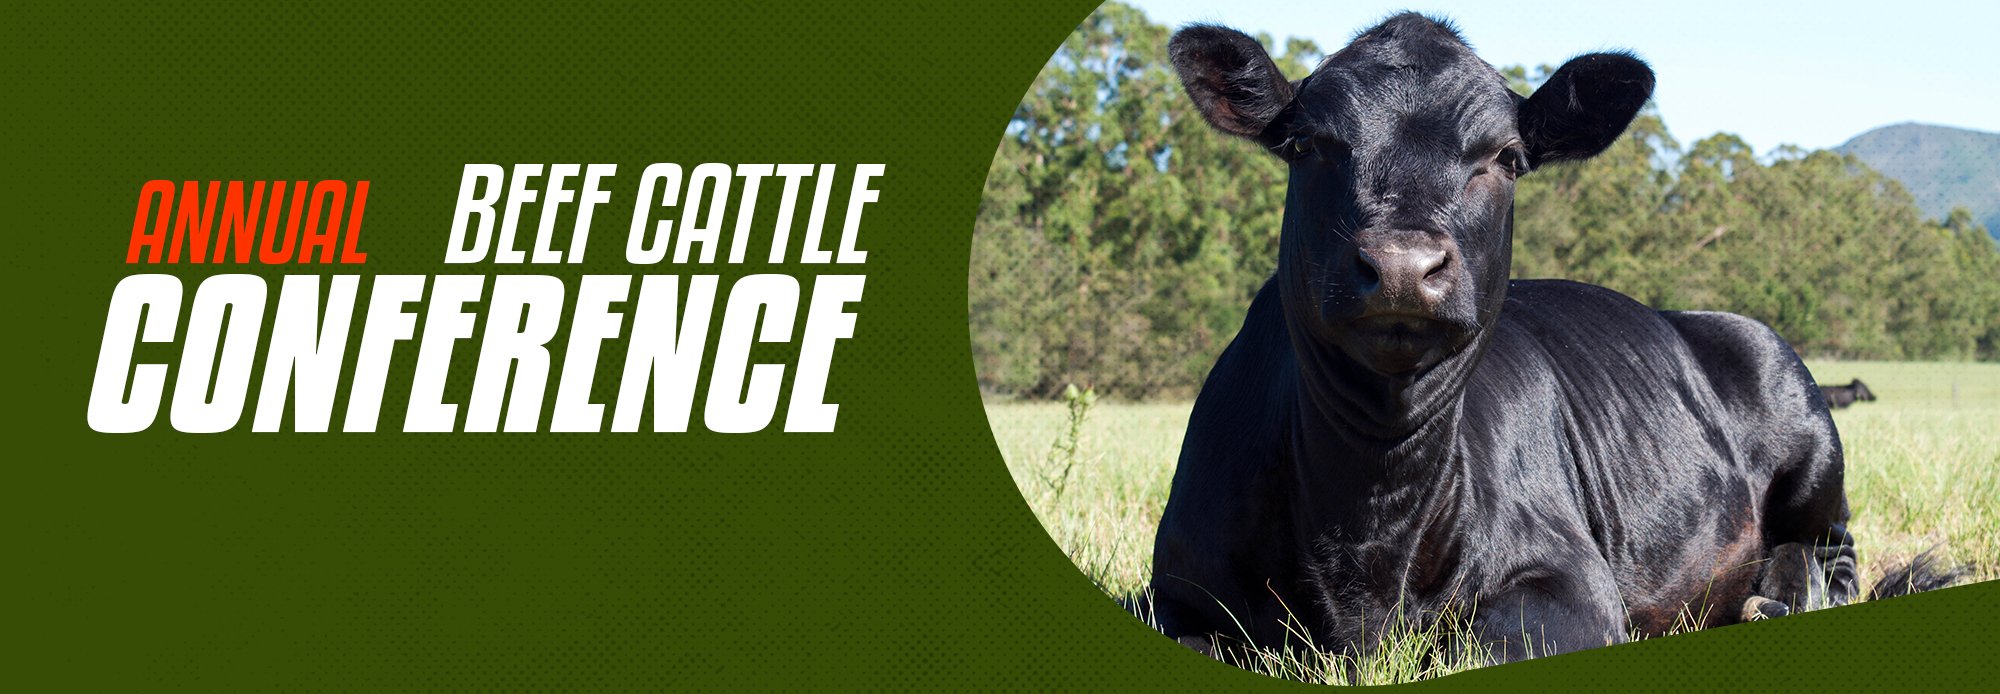 Beef Cattle Improvement Conference hero image